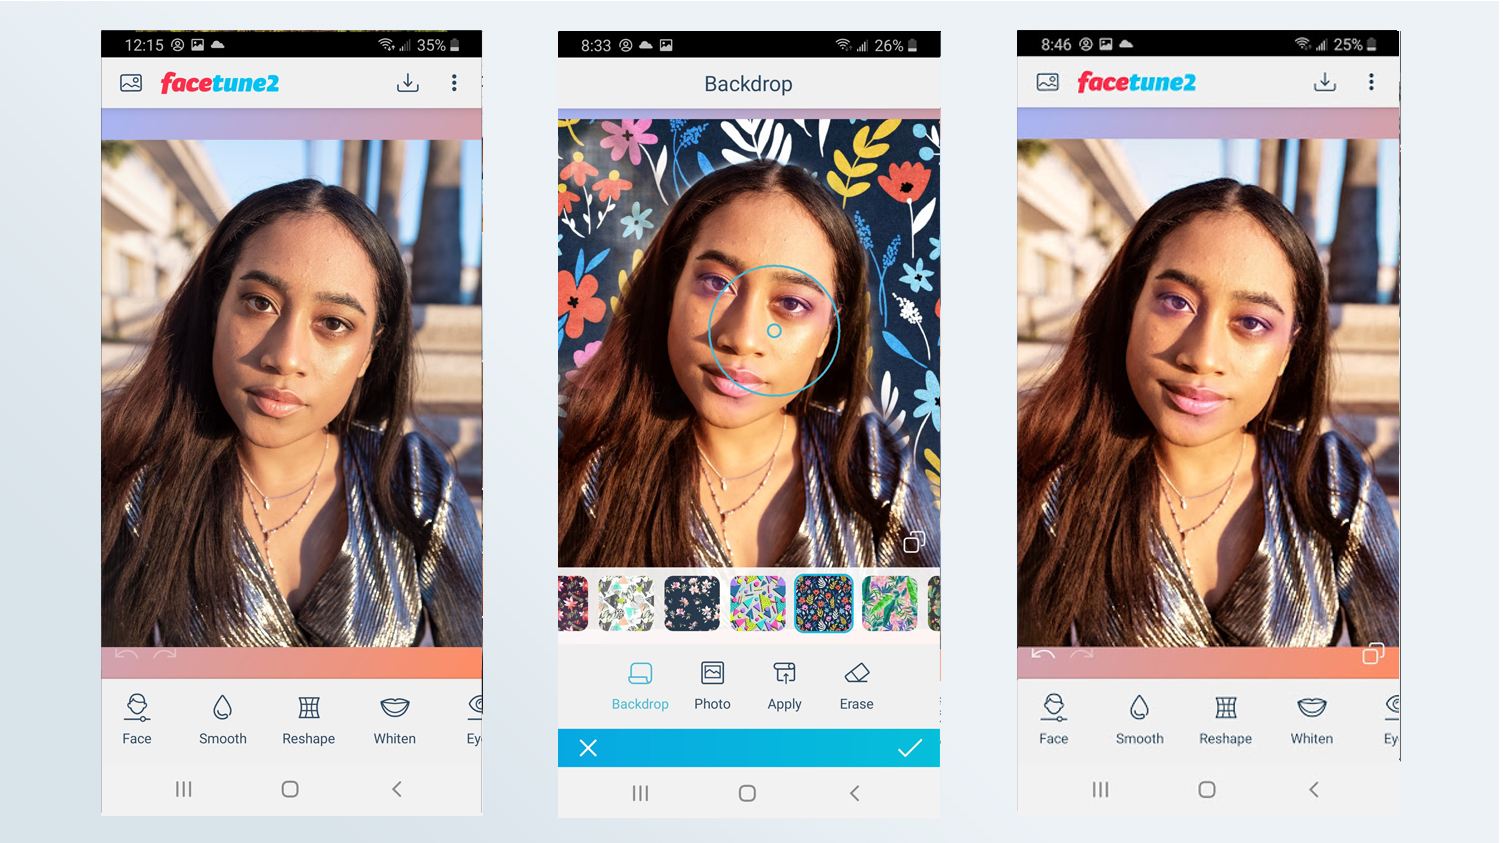 Screenshots showing the Facetune 2 photo editing app in use